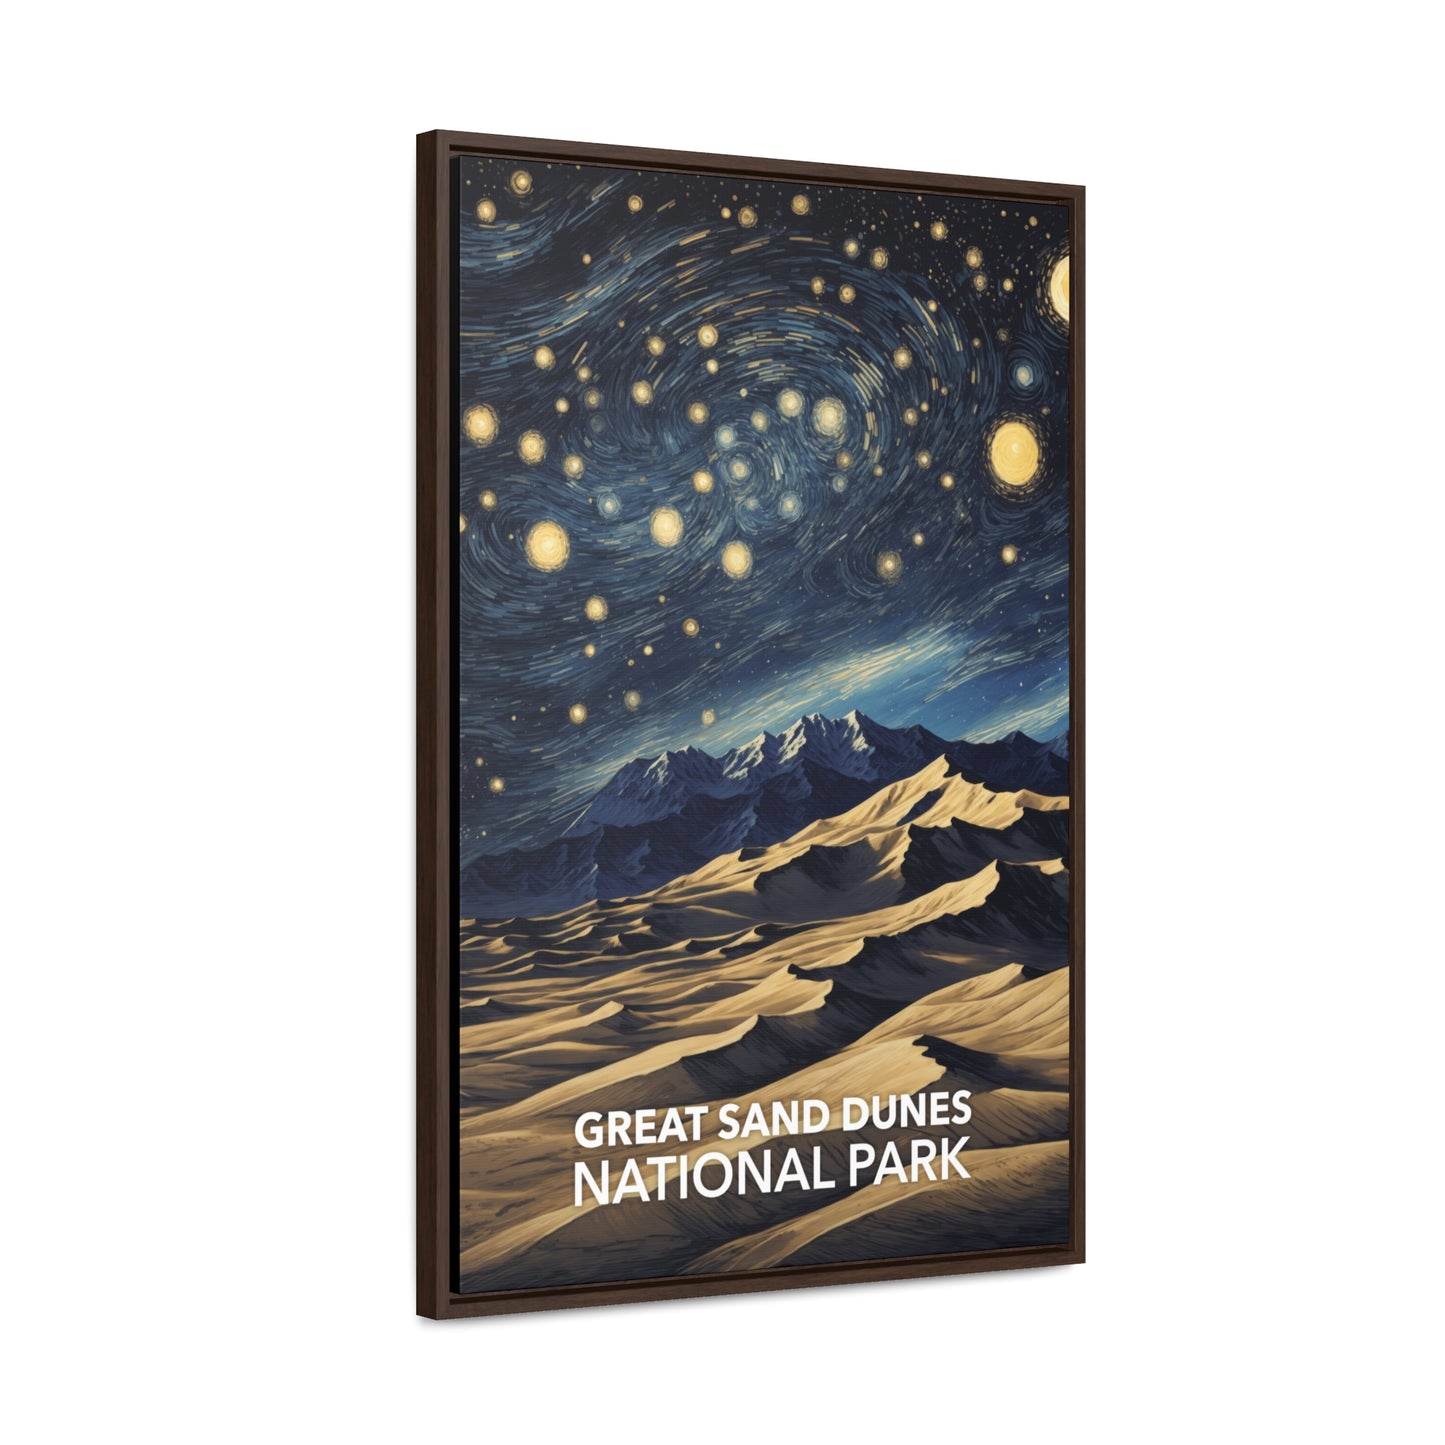 Great Sand Dunes National Park Framed Canvas - The Starry Night